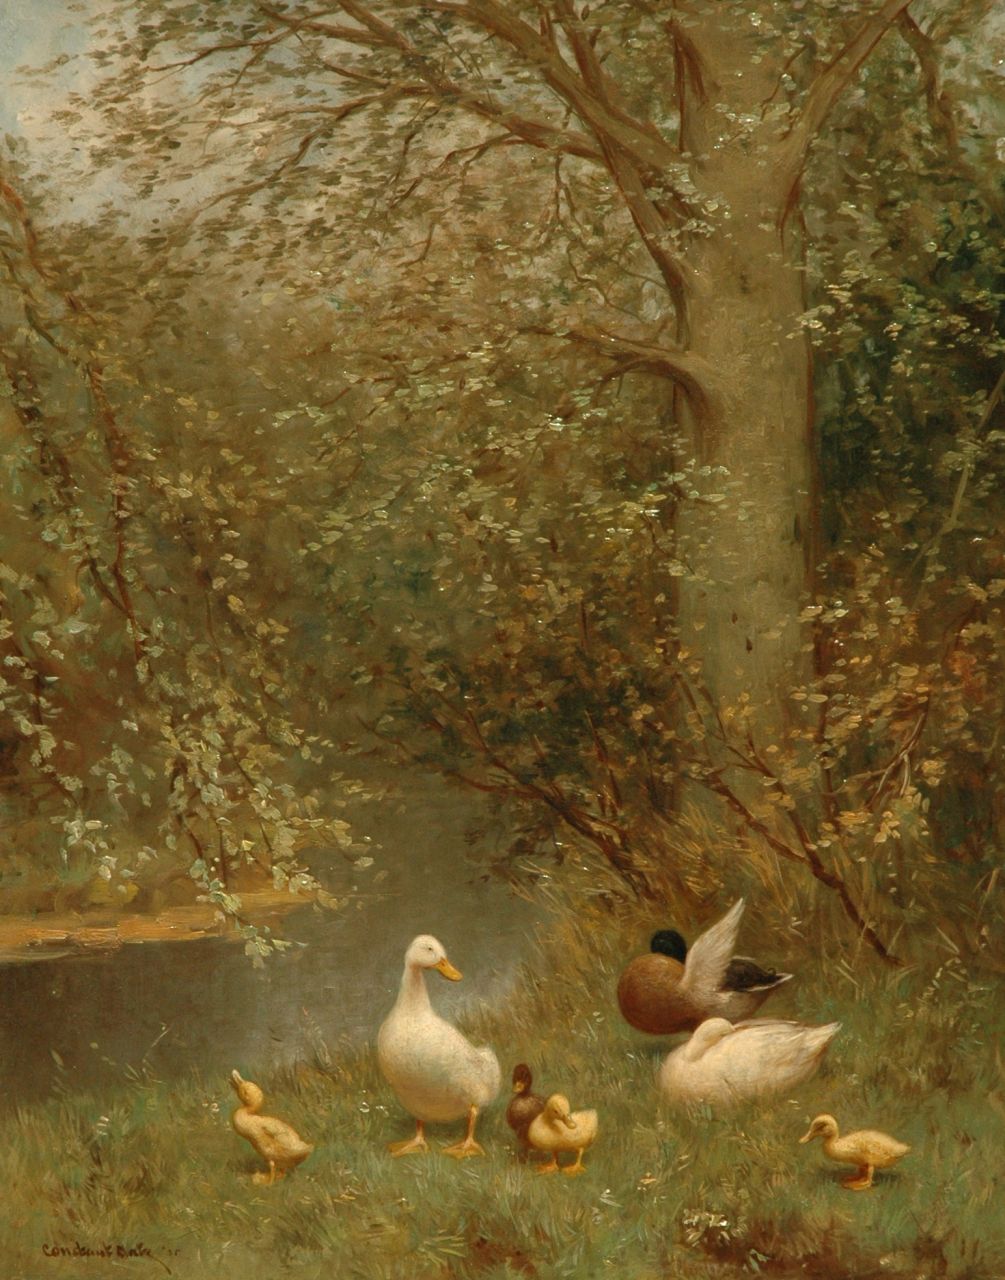 Artz C.D.L.  | 'Constant' David Ludovic Artz, Ducks in the shade of a beech, oil on panel 50.1 x 40.1 cm, signed l.l. and dated ' 35